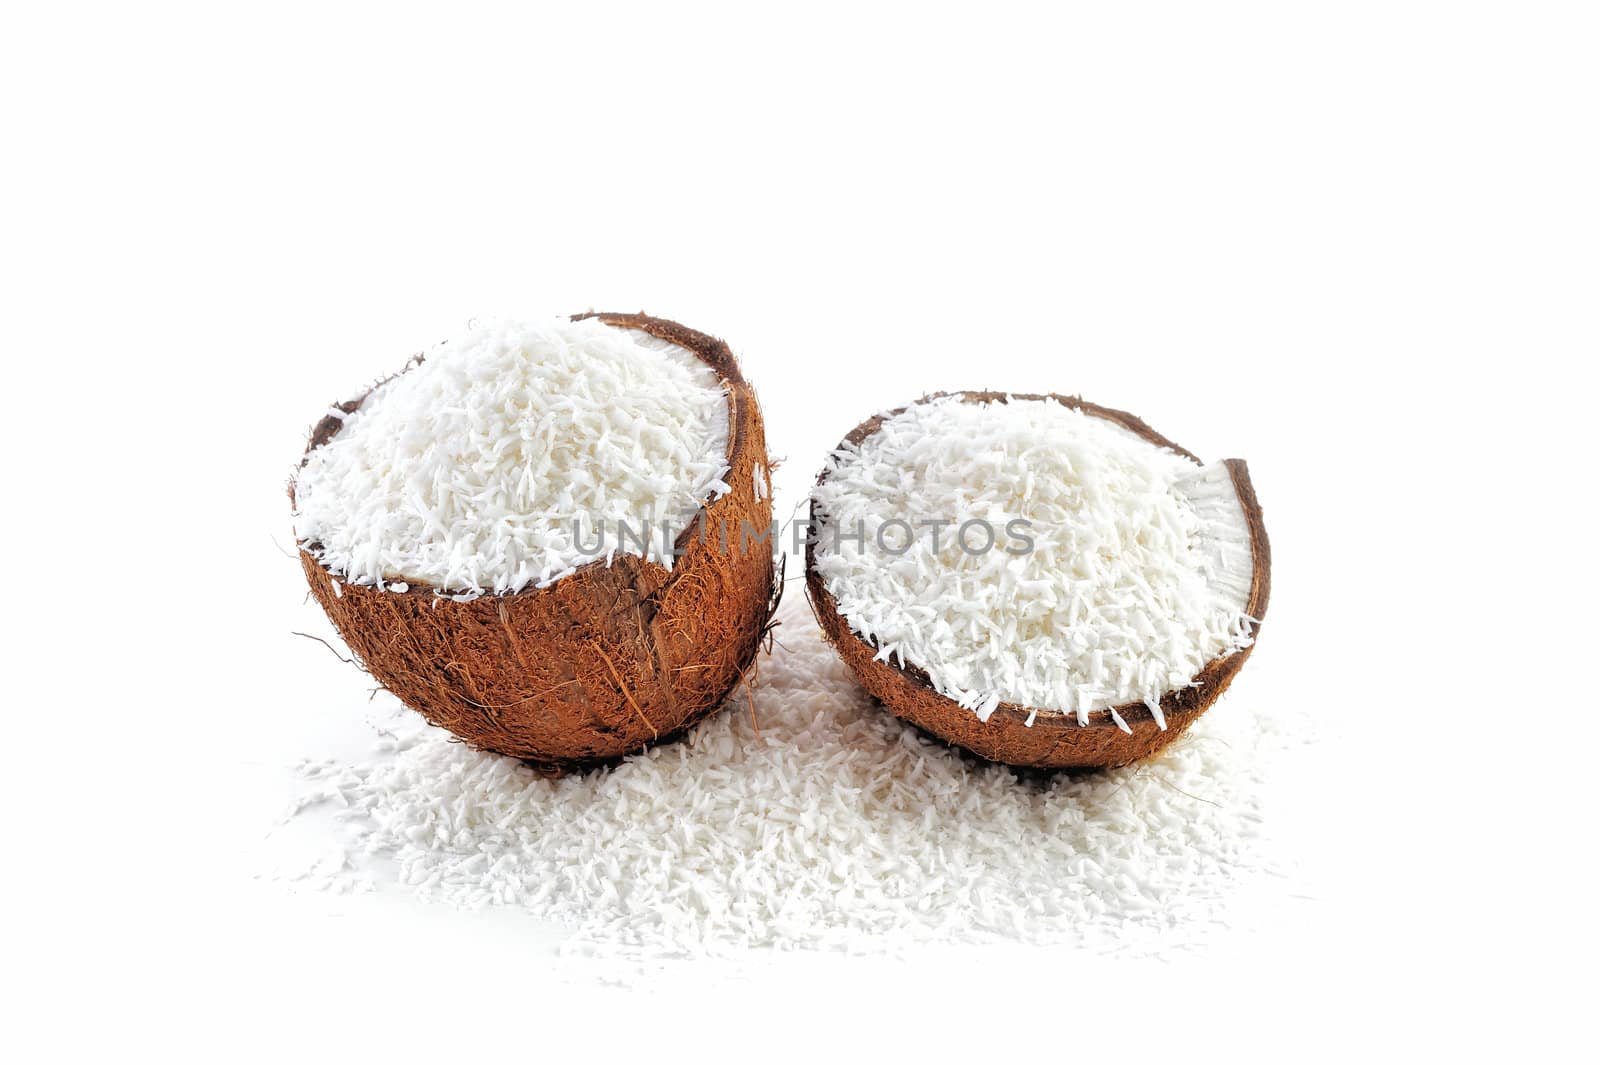 Halves of coconut parts is filled with crumbs